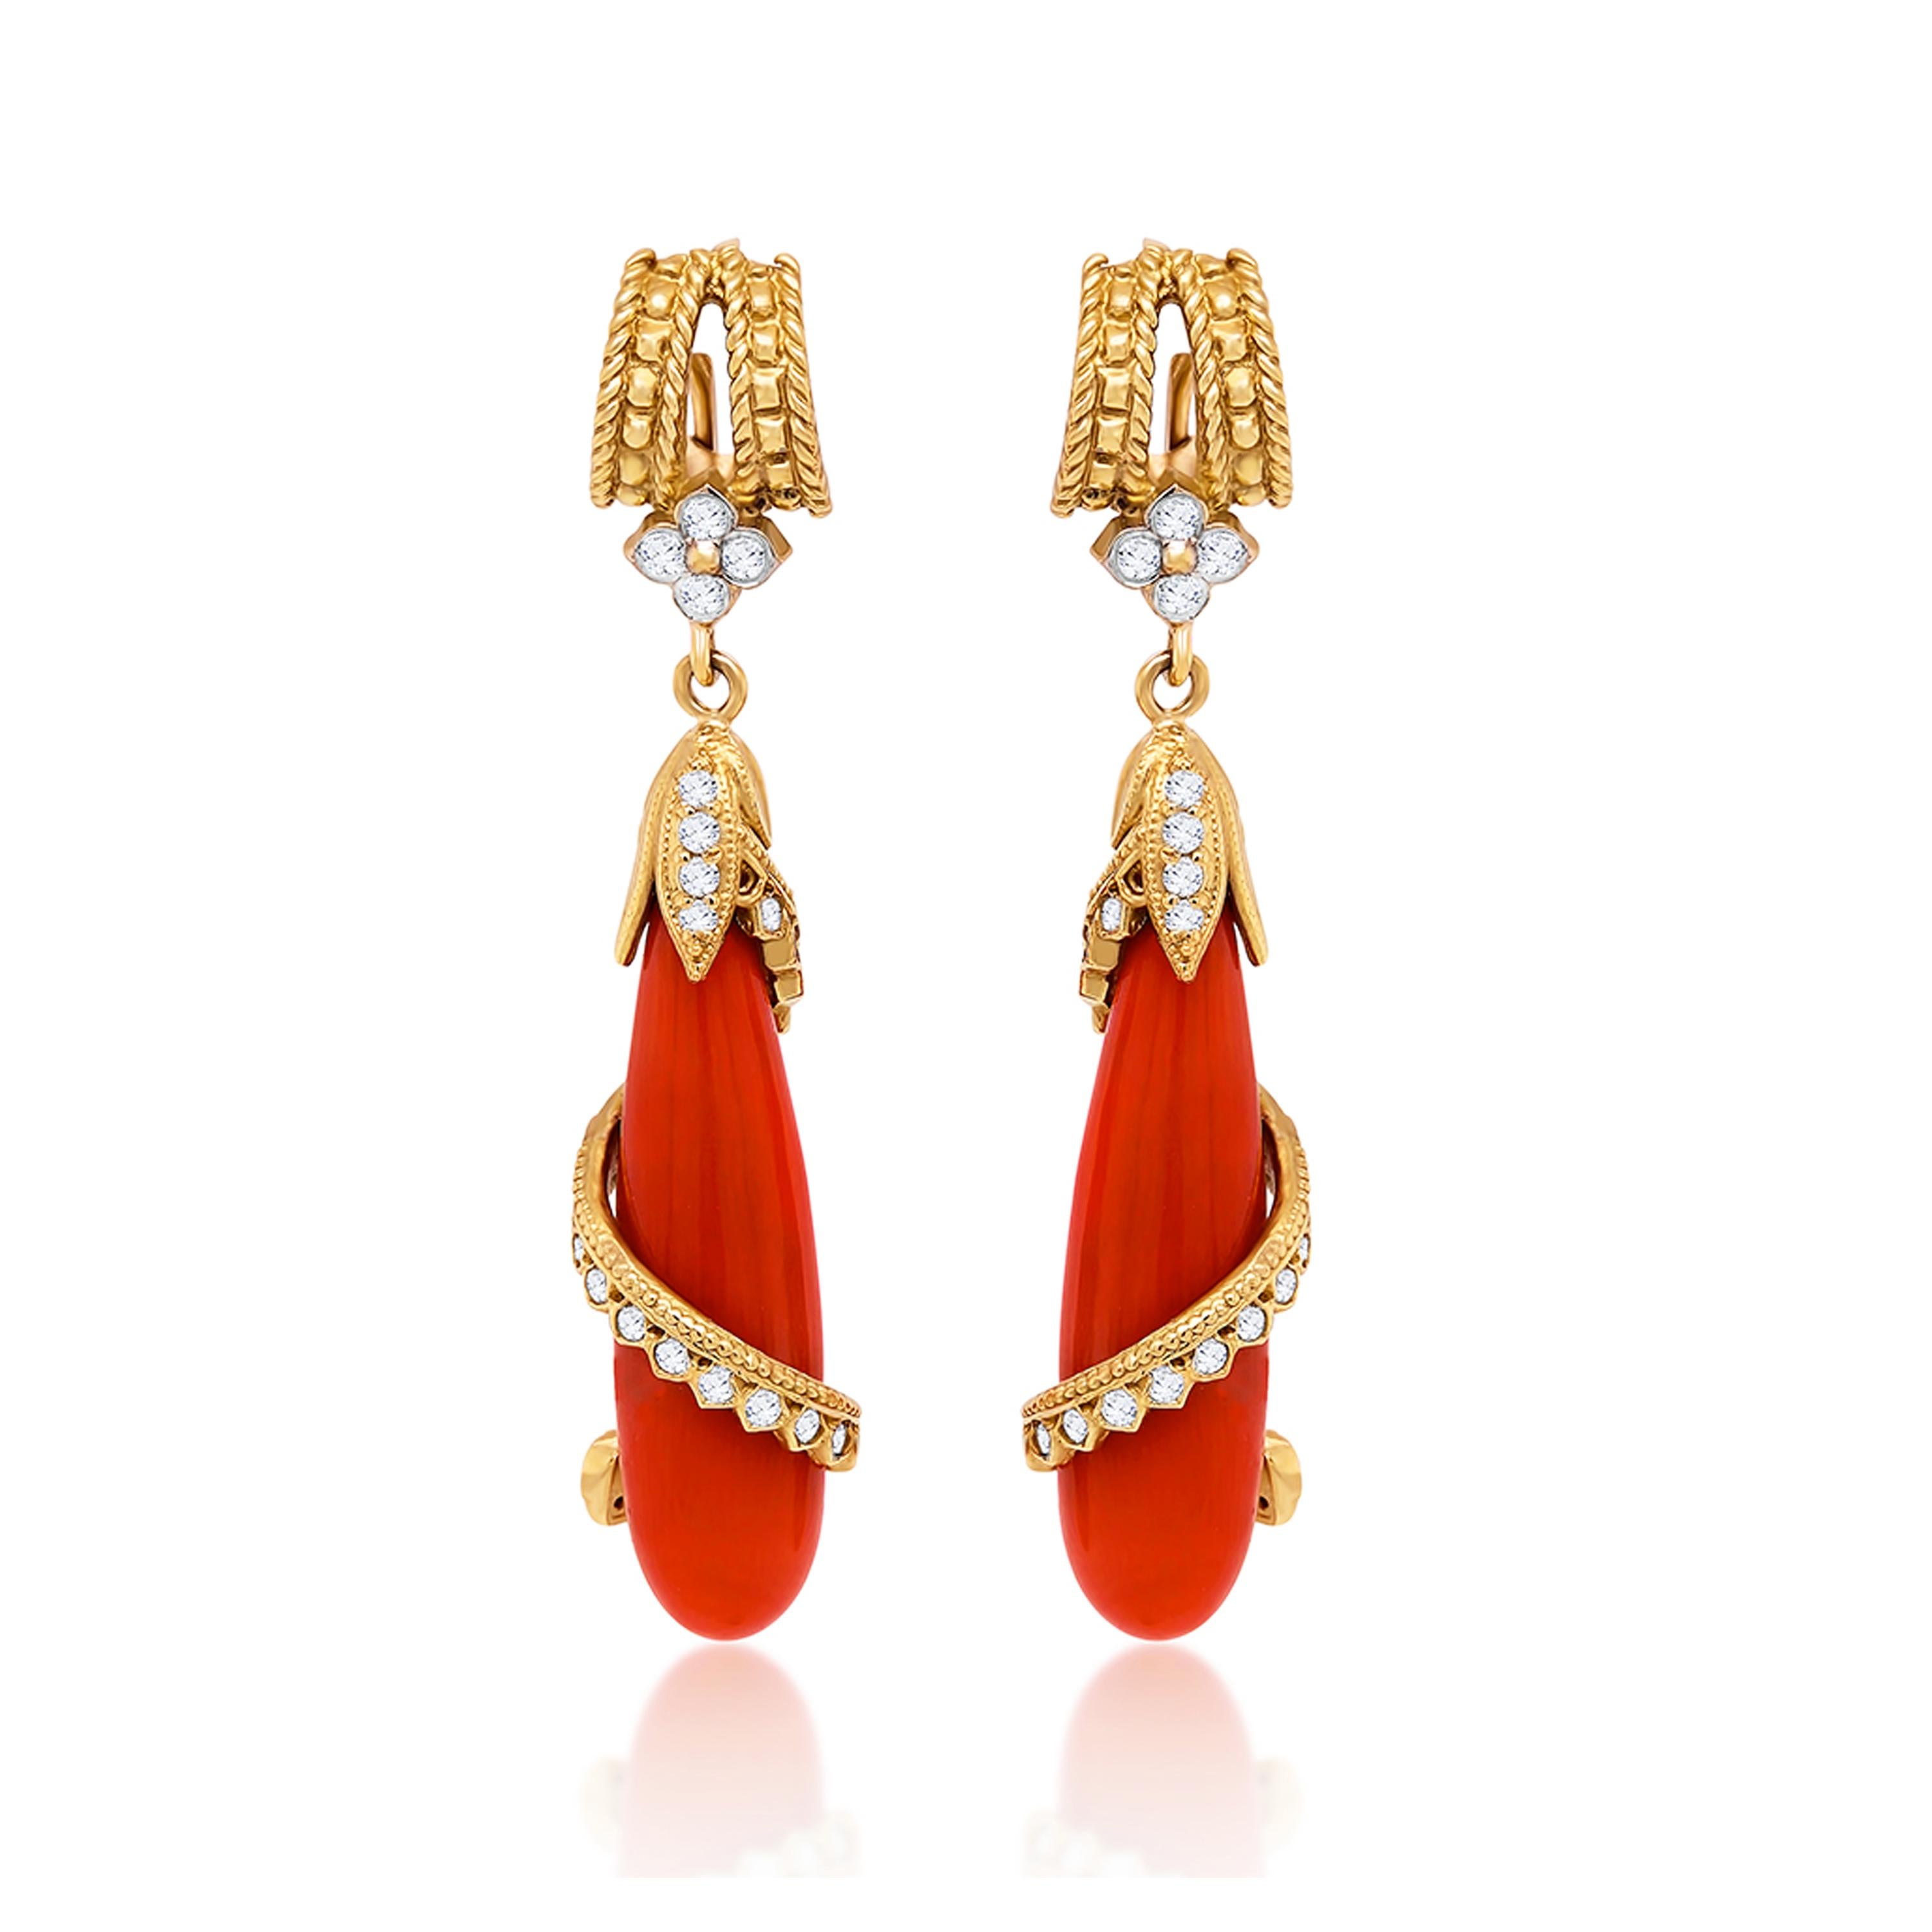 Stambolian 18K Gold and Diamond Twisted Sardinian Coral Drop Earrings In Excellent Condition For Sale In Boca Raton, FL